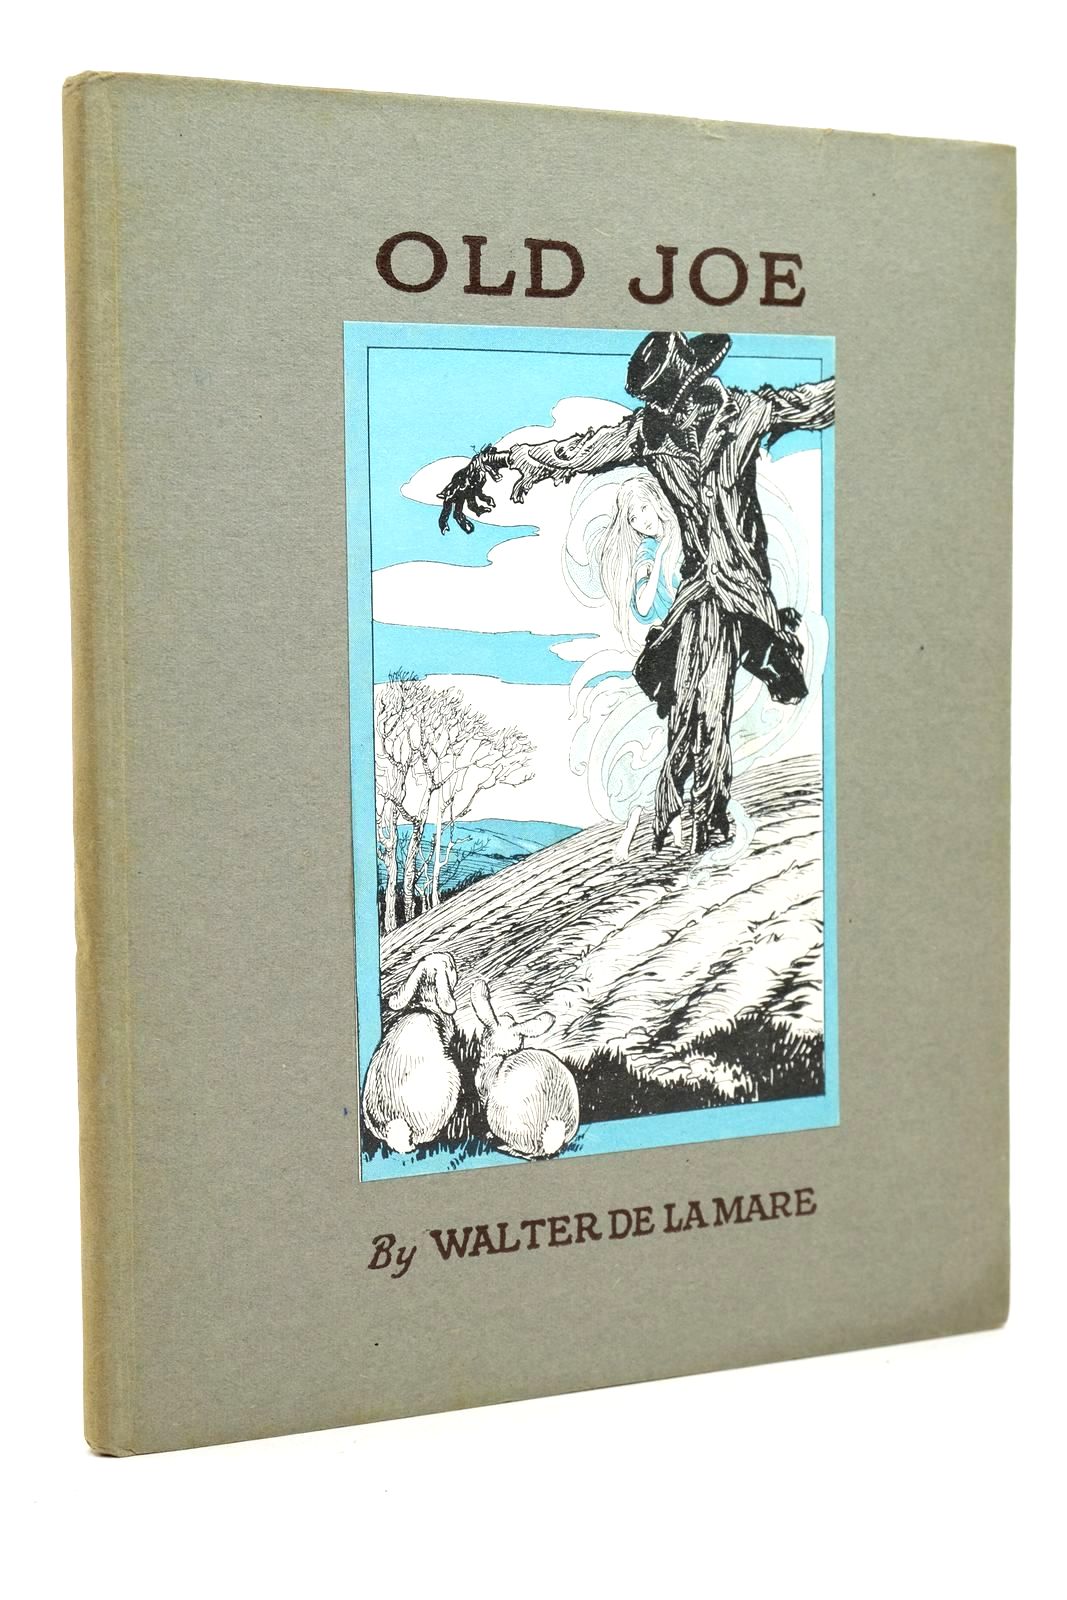 Photo of OLD JOE written by De La Mare, Walter illustrated by Nightingale, C.T. published by Basil Blackwell (STOCK CODE: 1322953)  for sale by Stella & Rose's Books